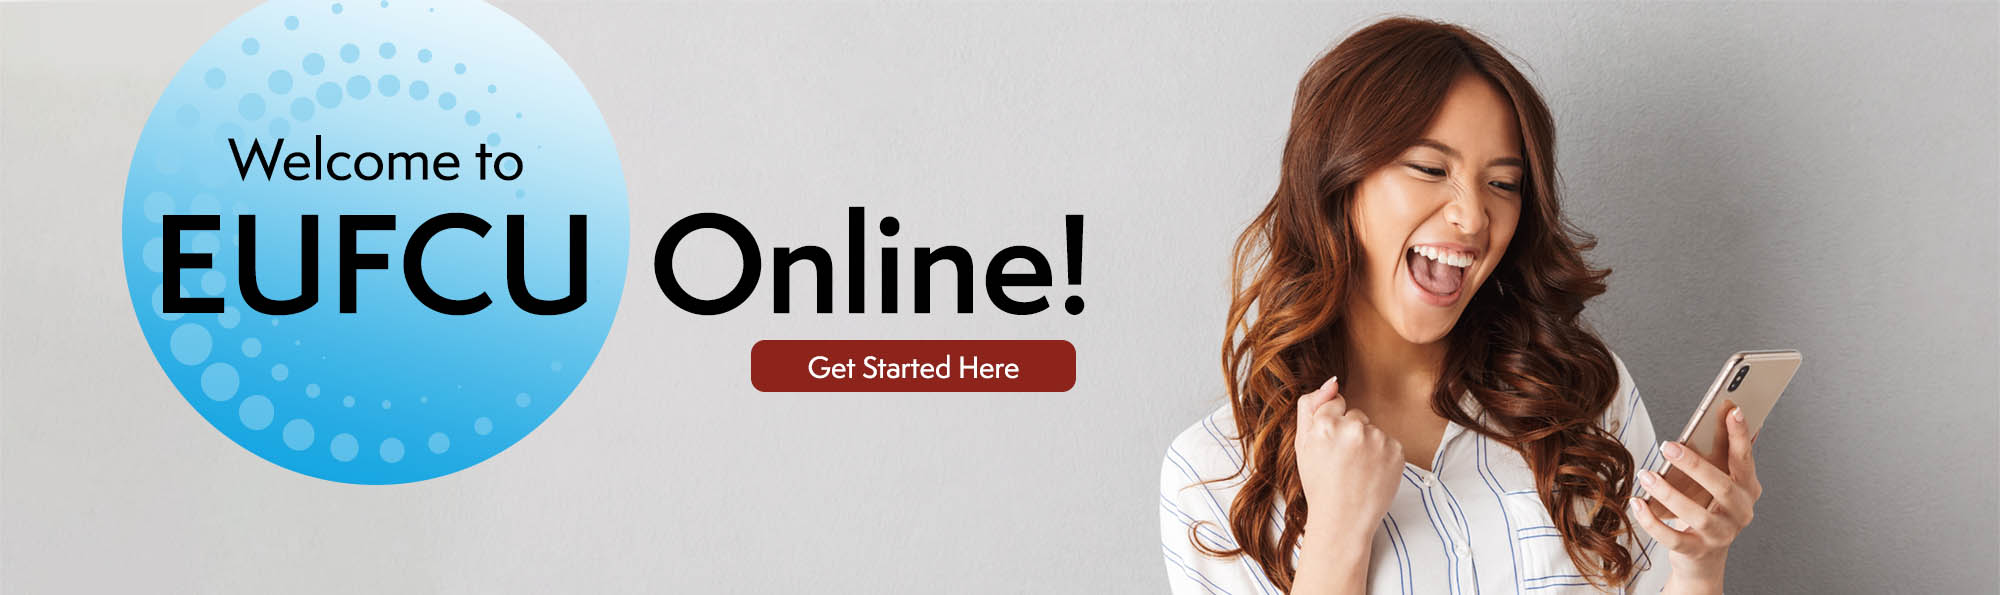 Welcome to EUFCU Online! Get Started Here.